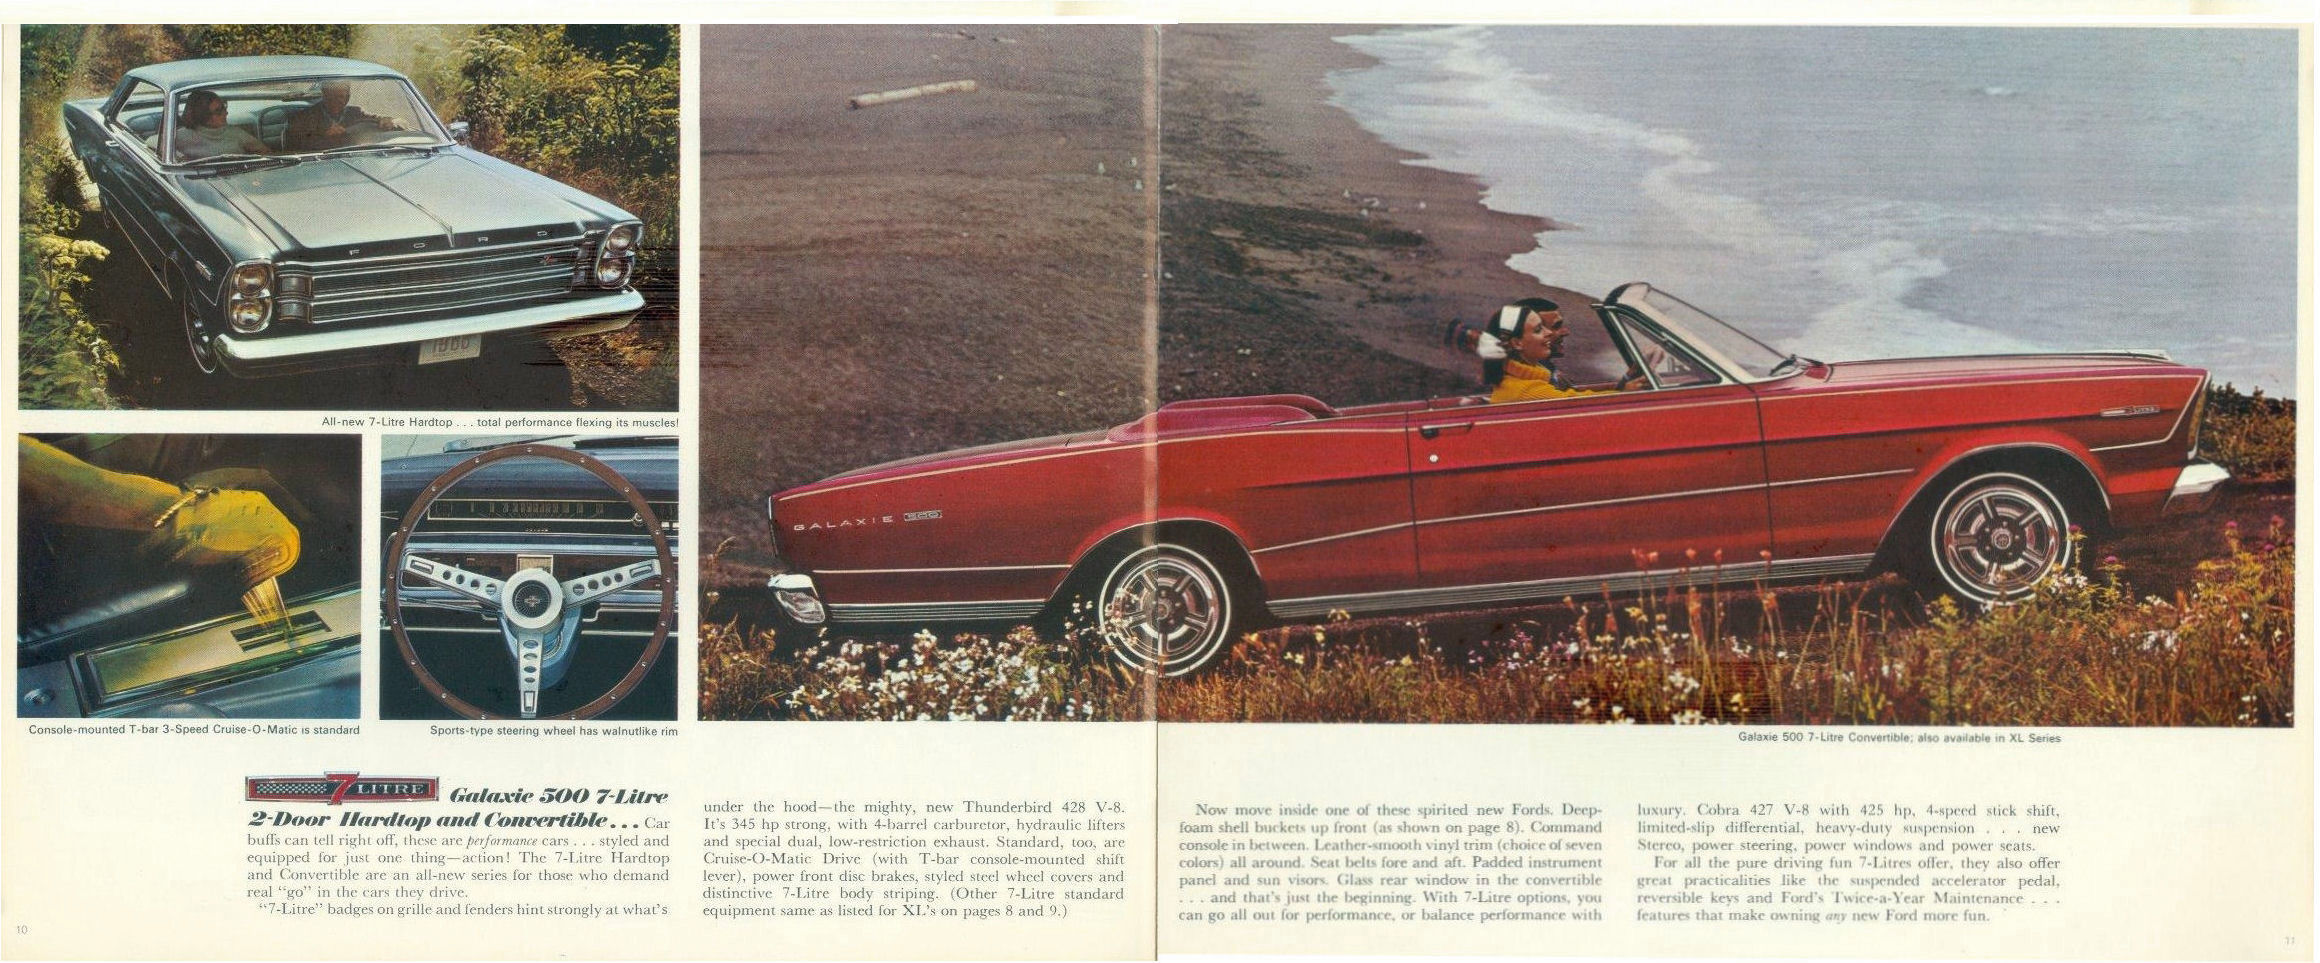 1966_Ford_Full_Size-10-11